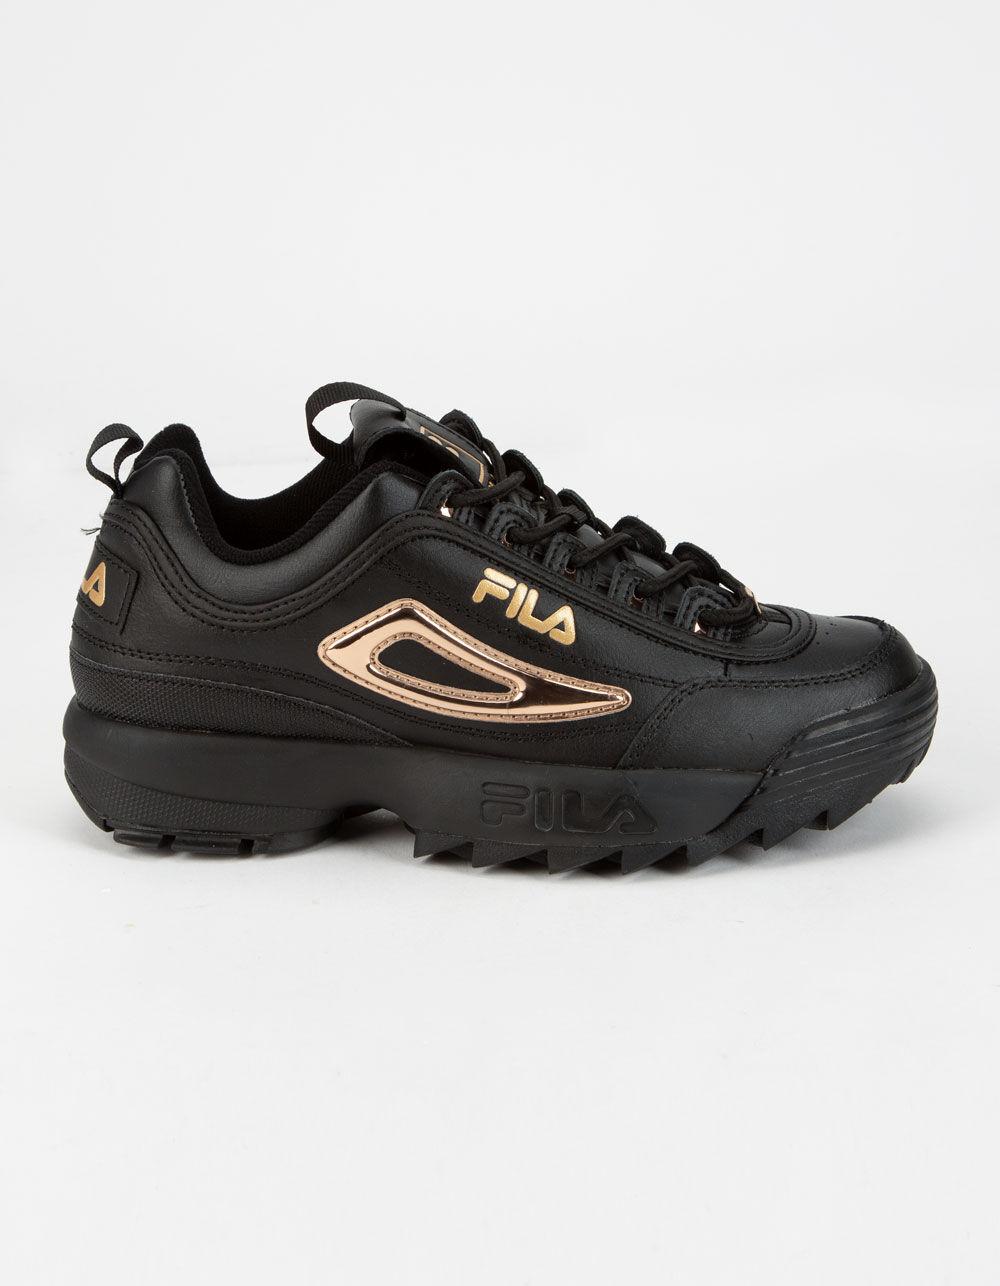 Fila Leather Disruptor Ii Metallic Accent Black & Gold Womens Shoes - Lyst